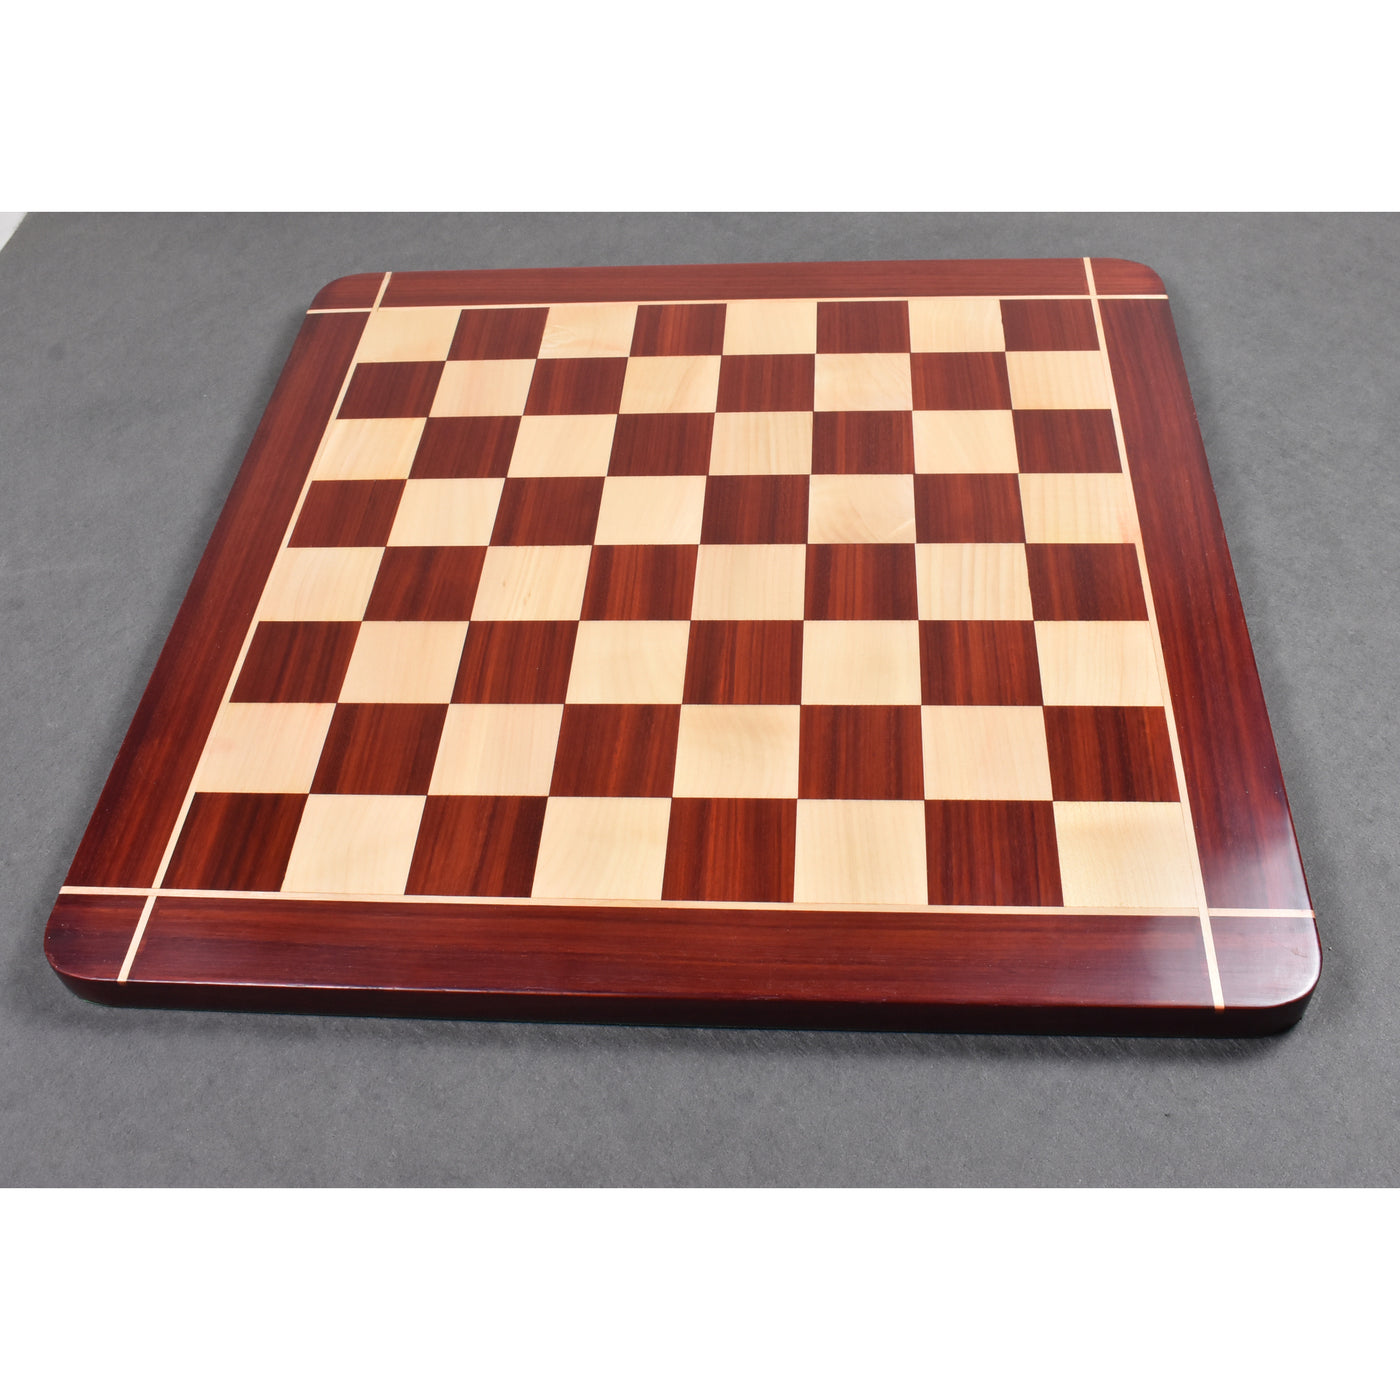 Combo of Bath Luxury Staunton Bud Rosewood Chess Pieces with 23 inches Chessboard and Storage Box